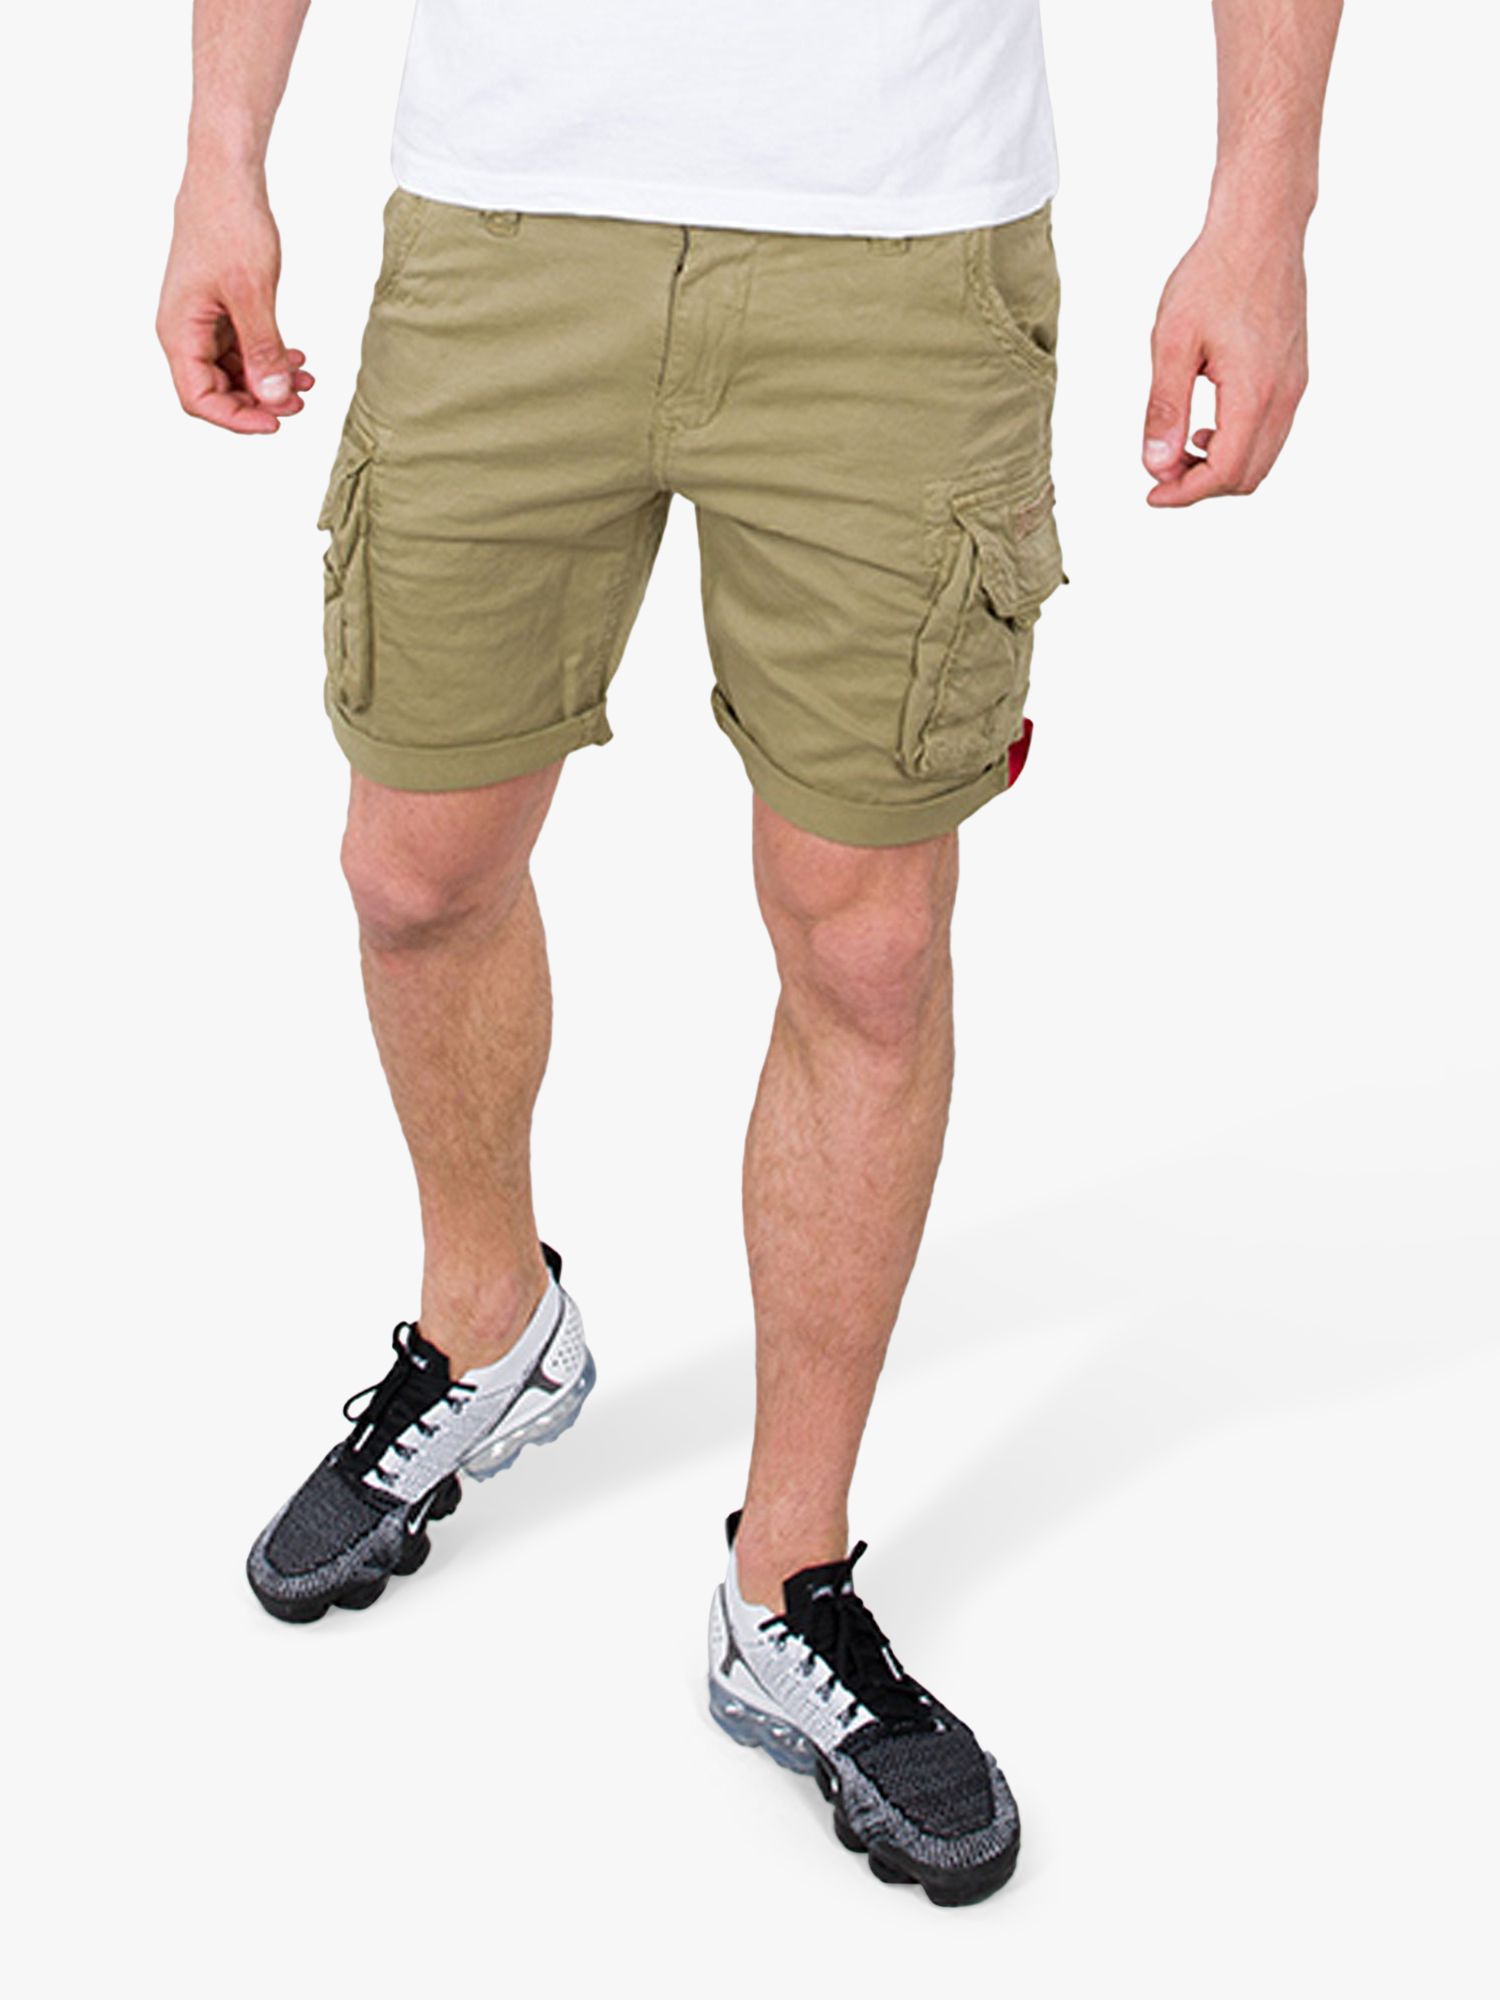 Partners Industries Light & John Crew Cargo Shorts, at Alpha Olive Lewis 82